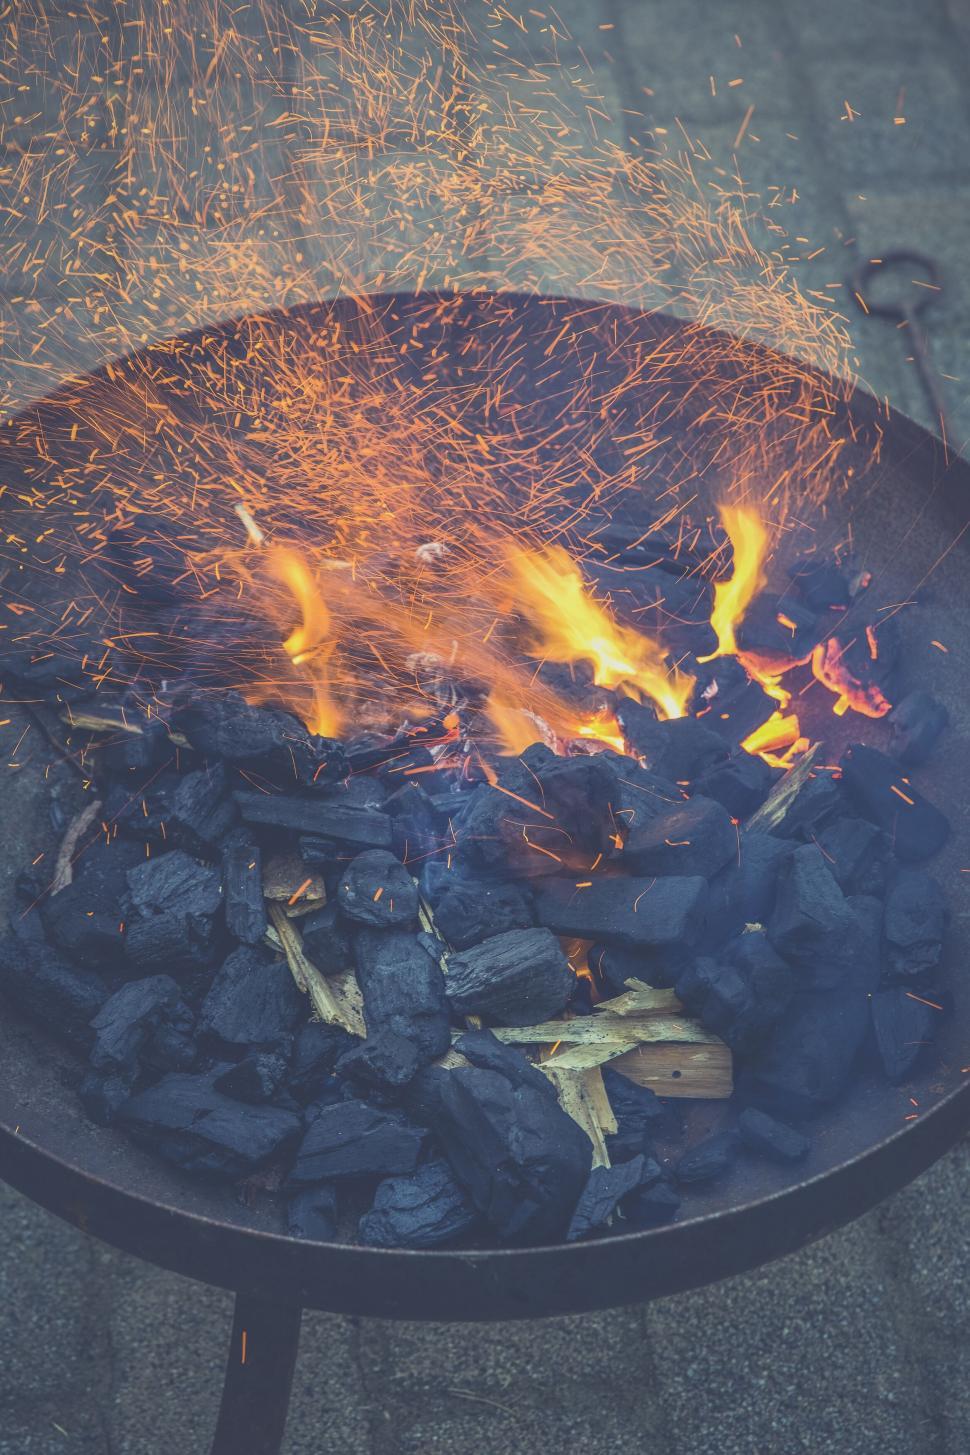 Free Image of Charcoal grill with vibrant fire sparks 